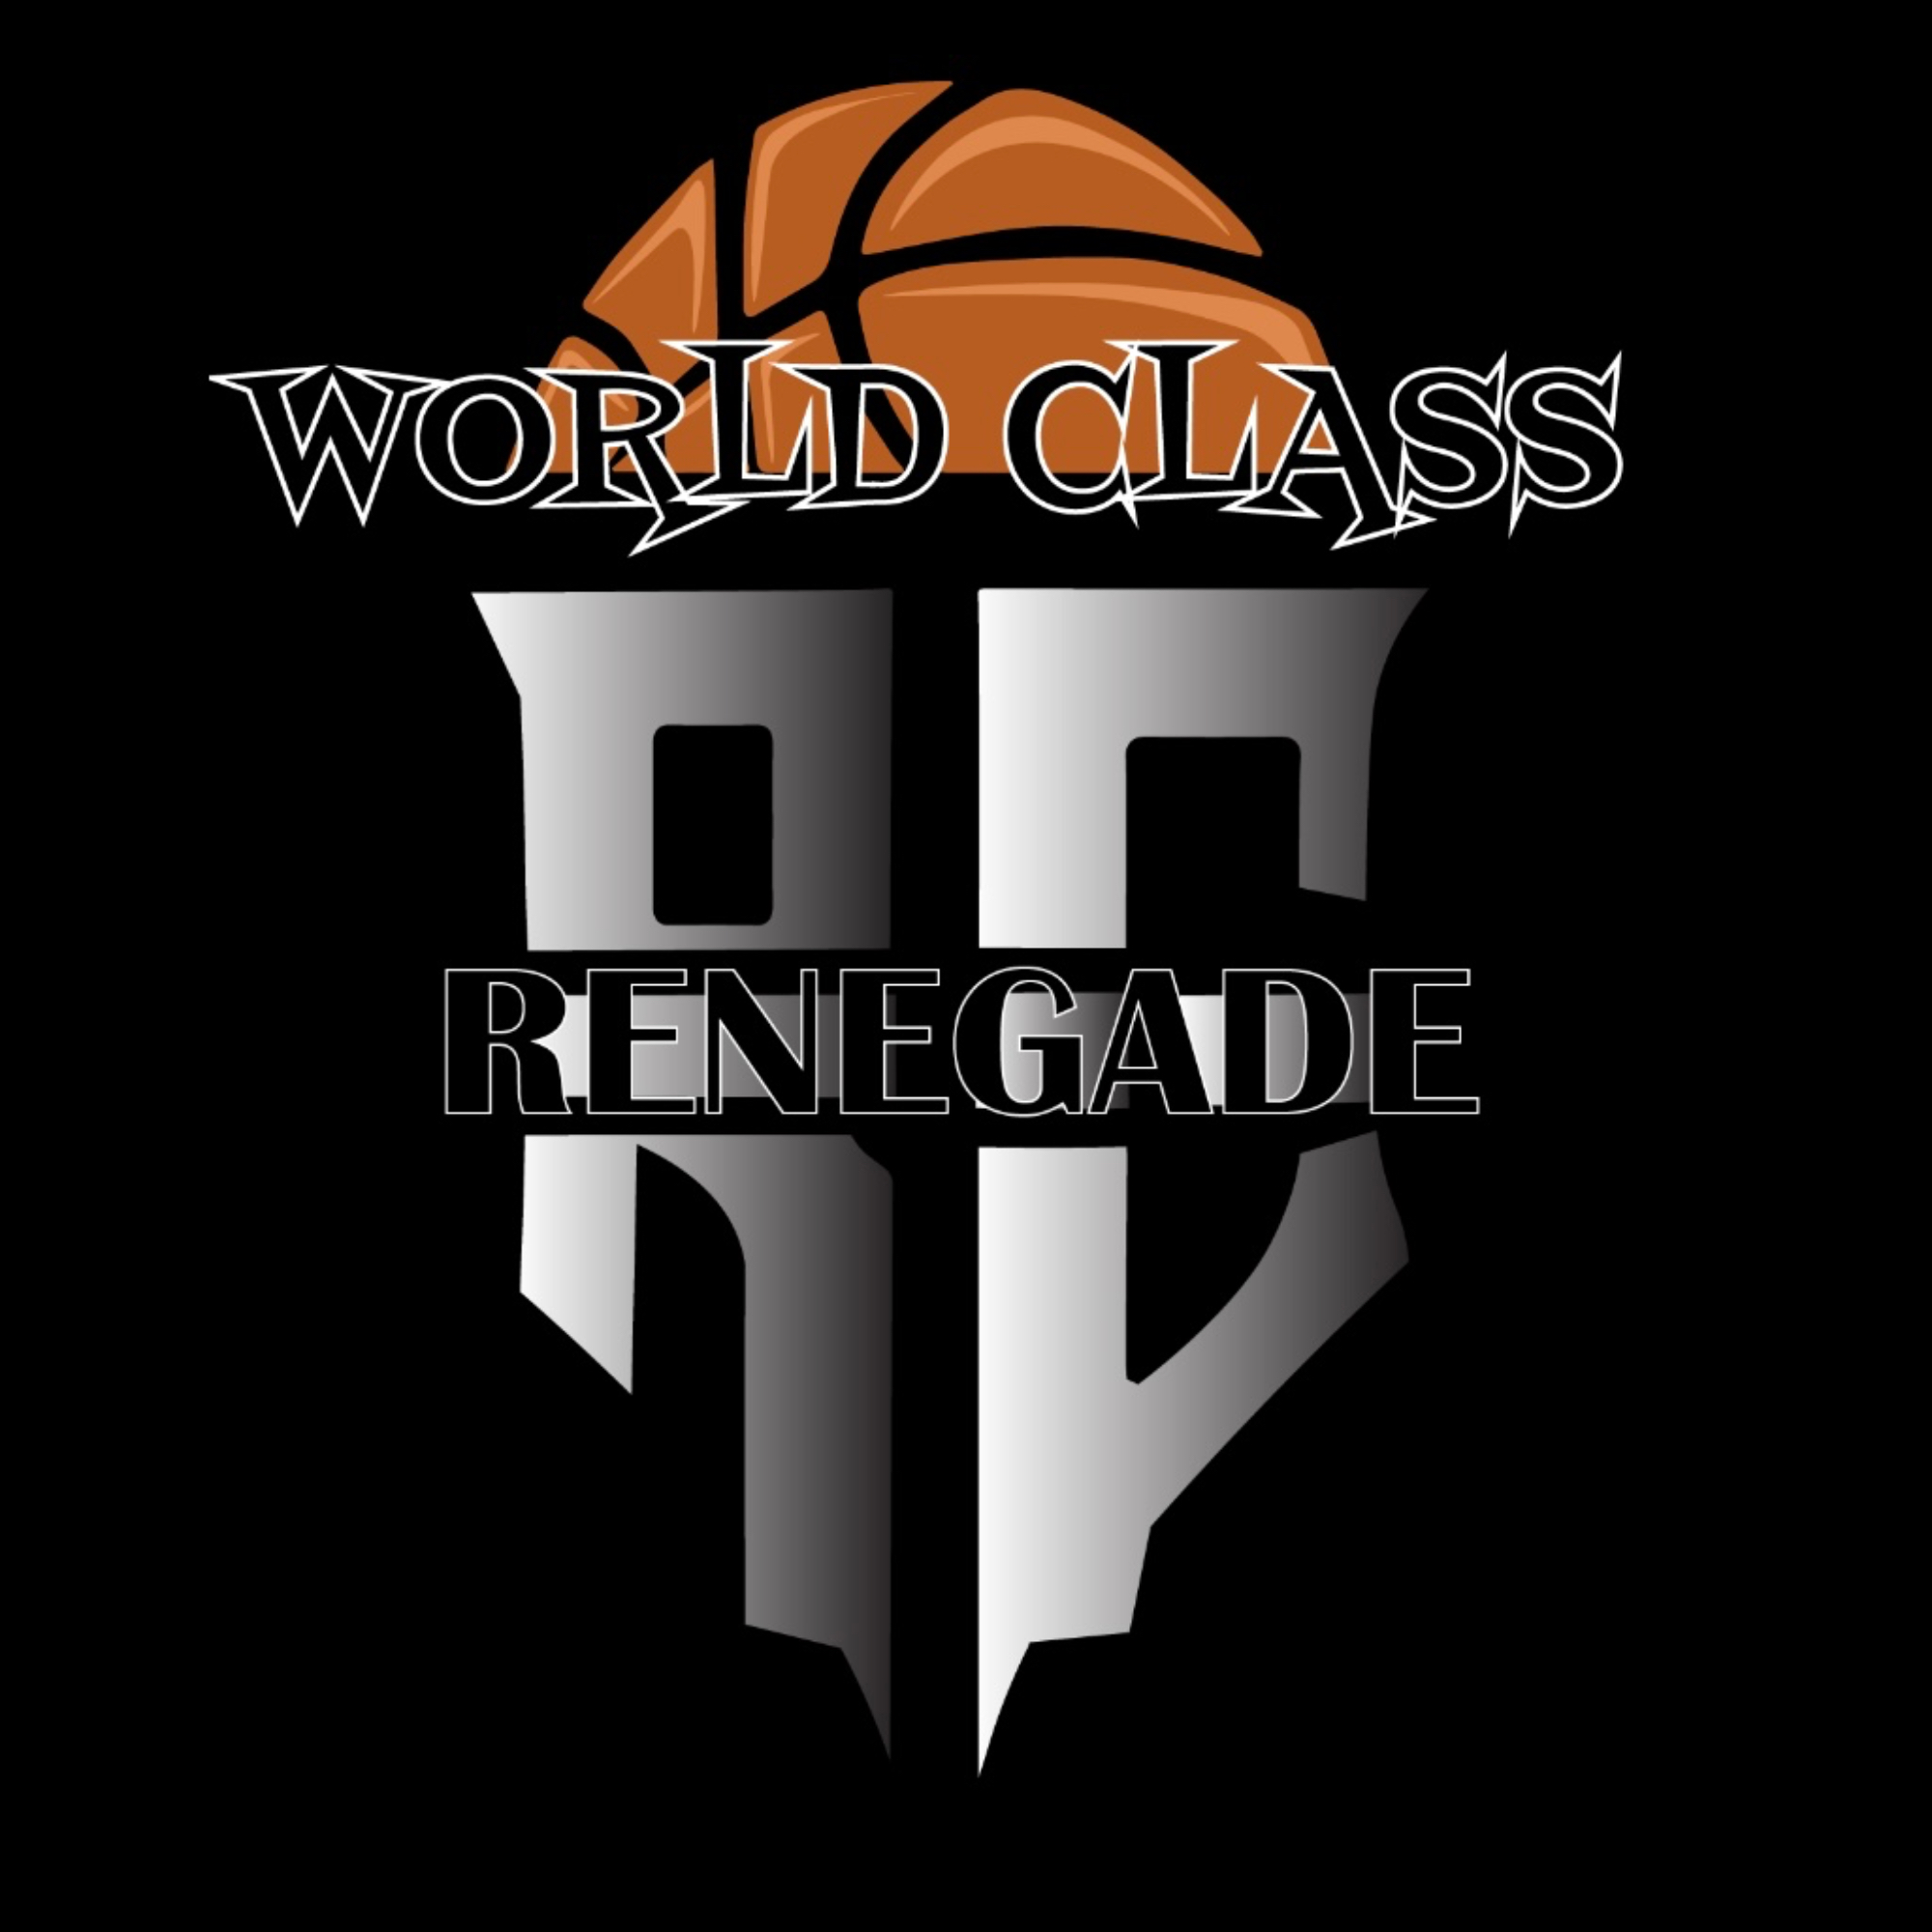 The official logo of World Class Renegades